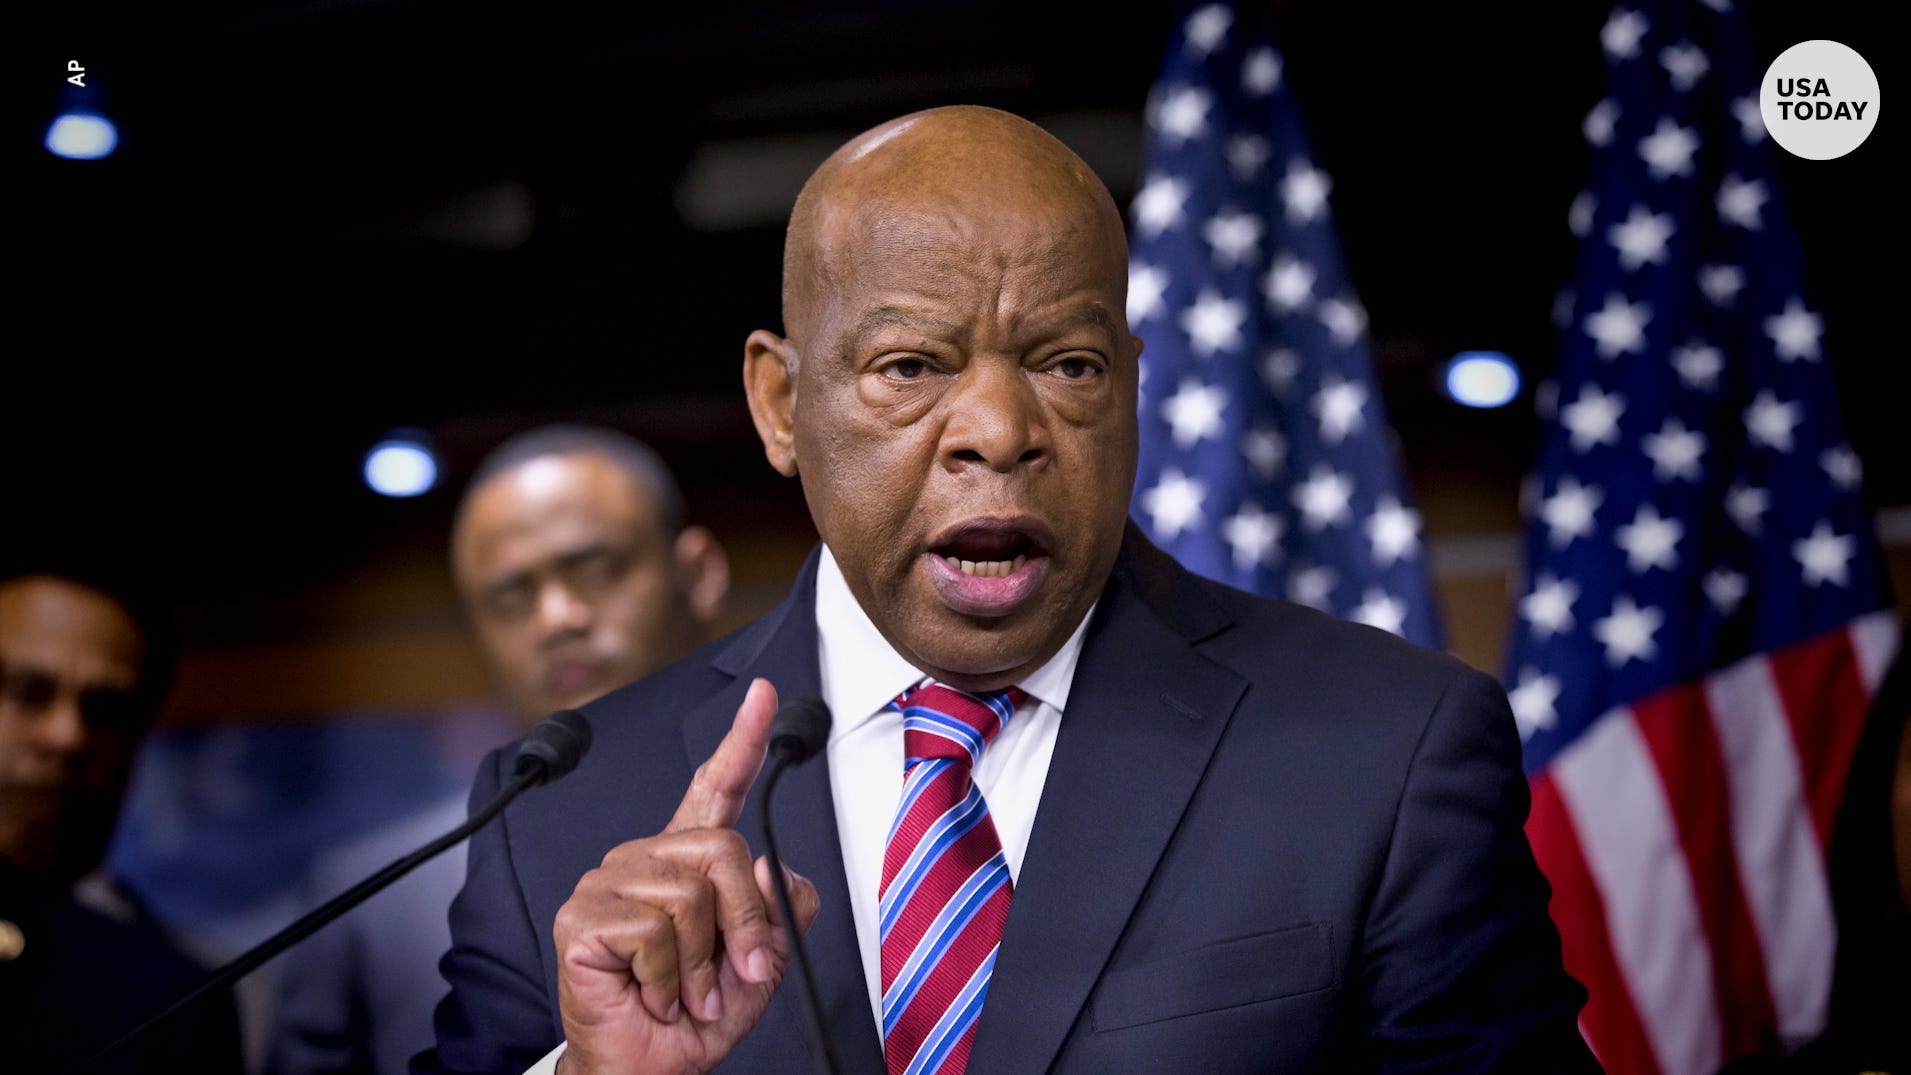 John Lewis&#39; best quotes: &#39;Get in good trouble&#39;